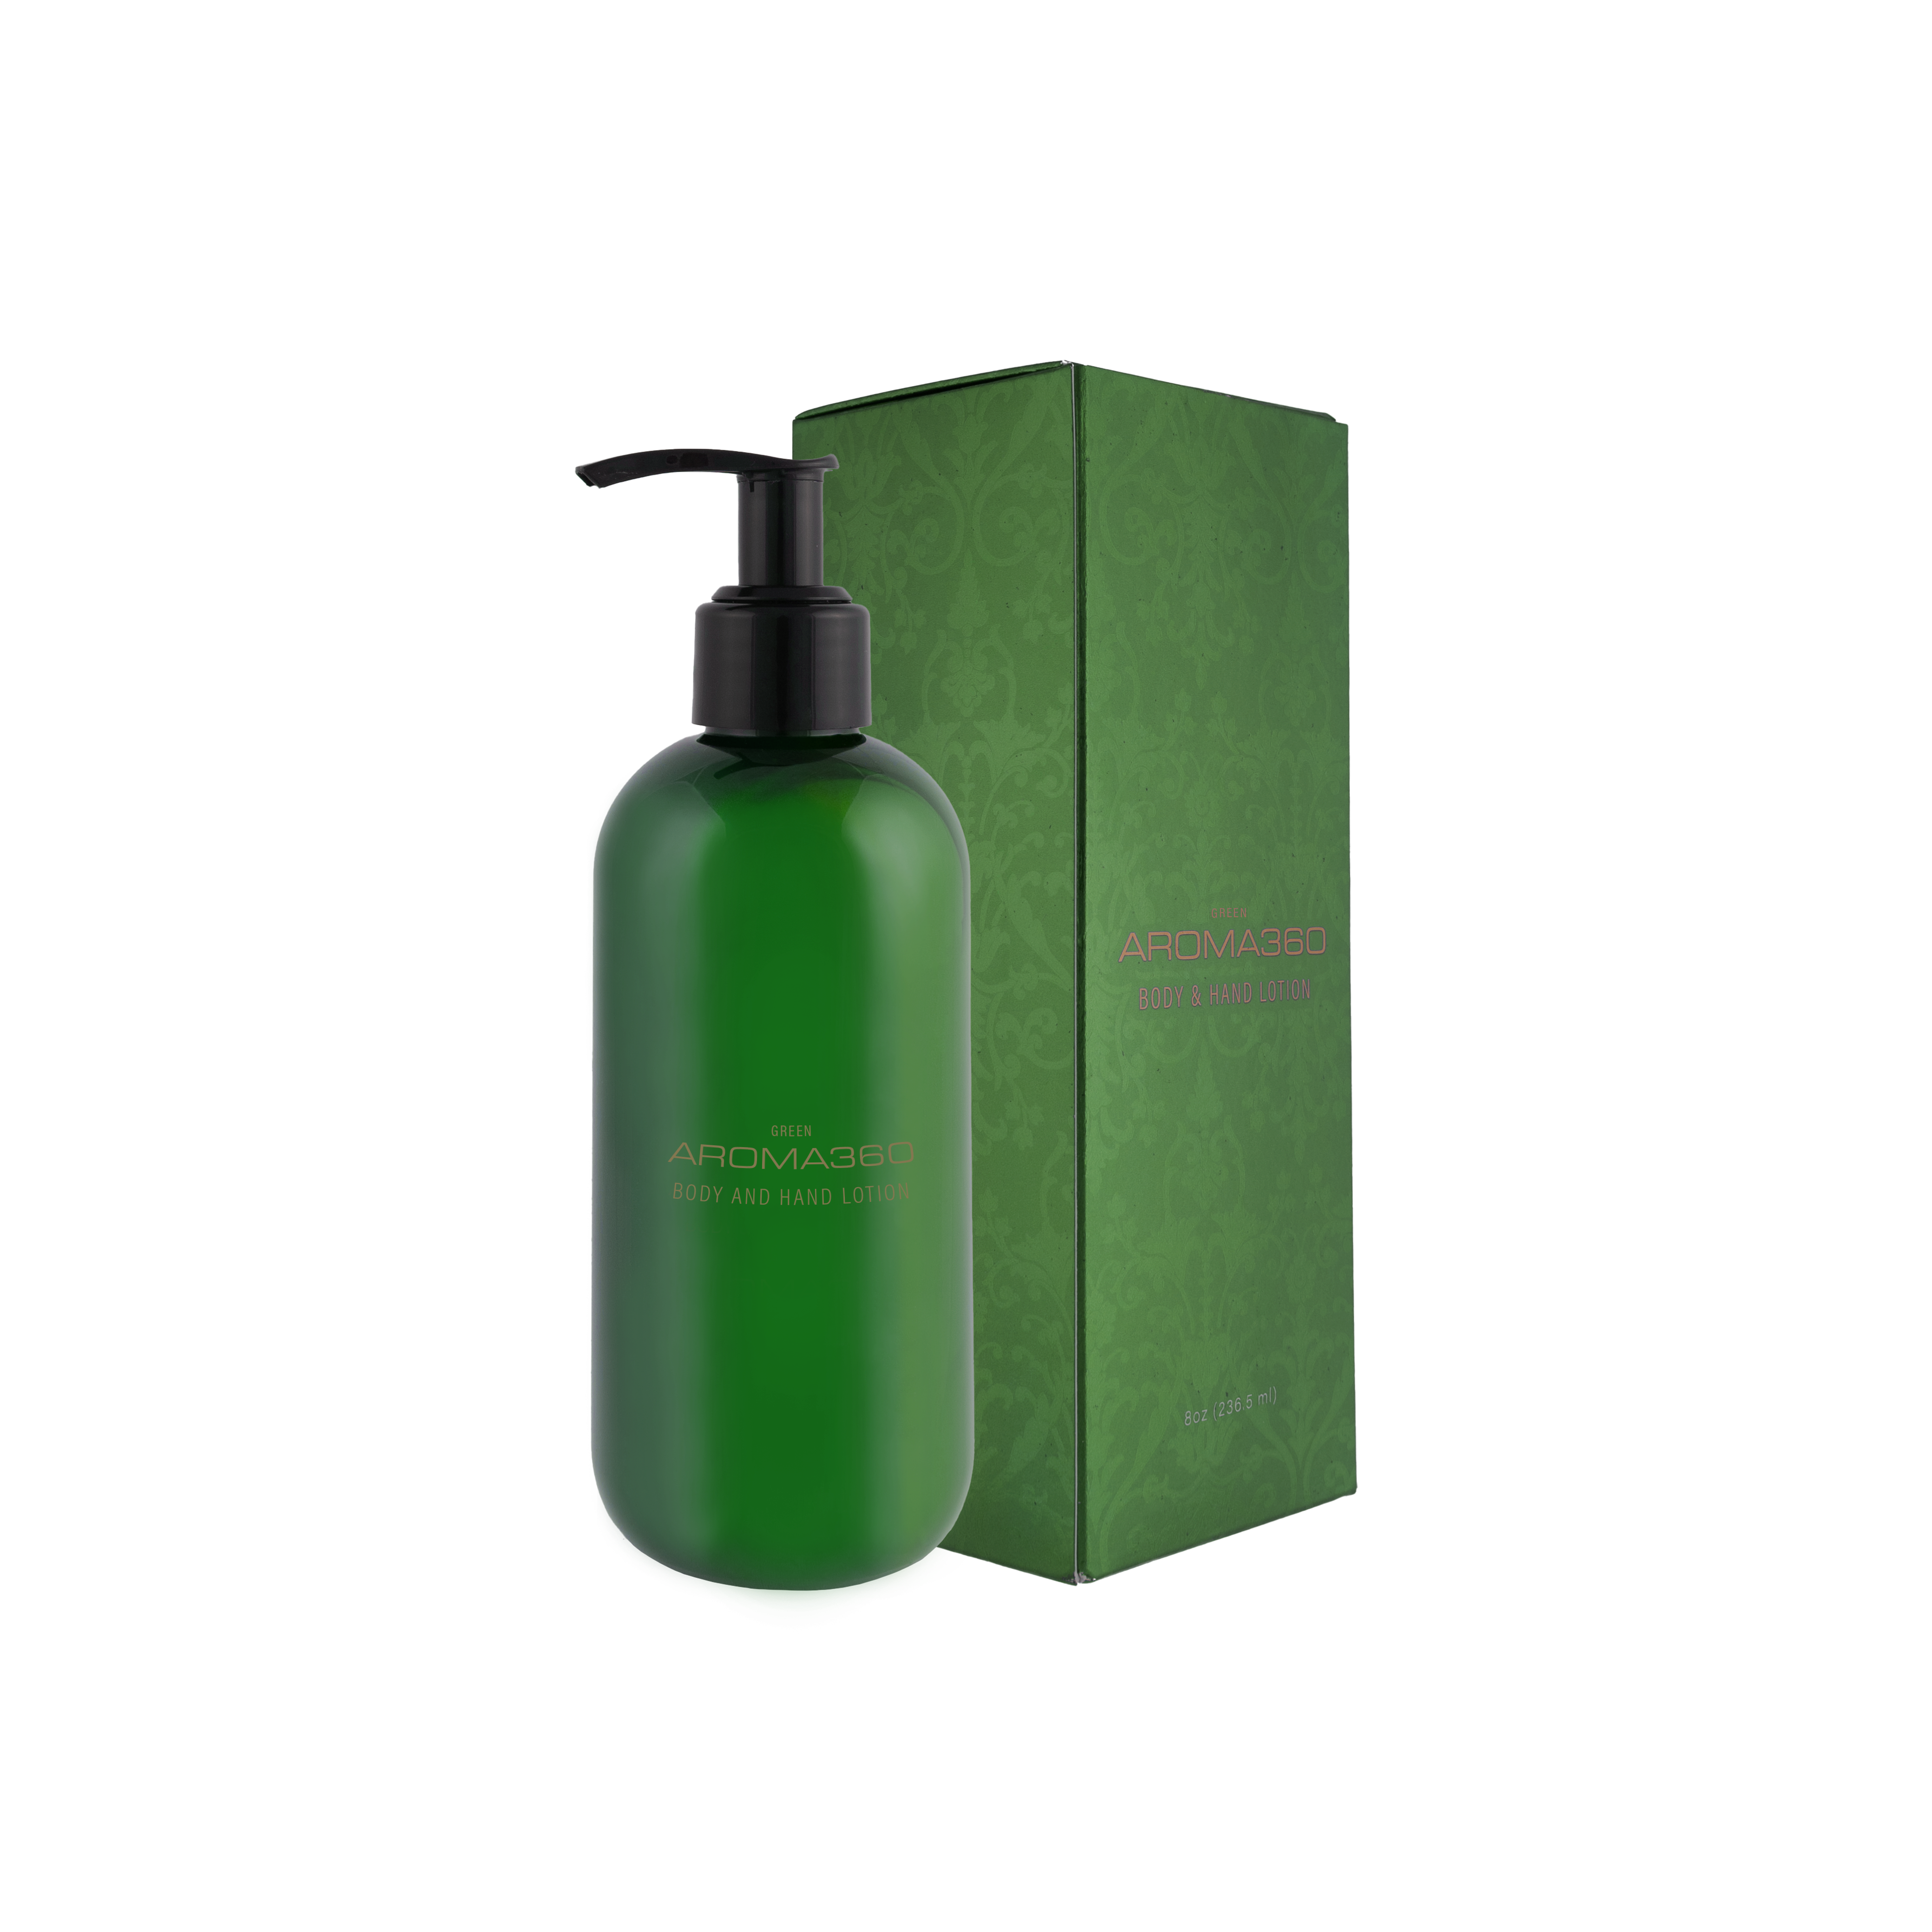 Green Body & Hand Lotion